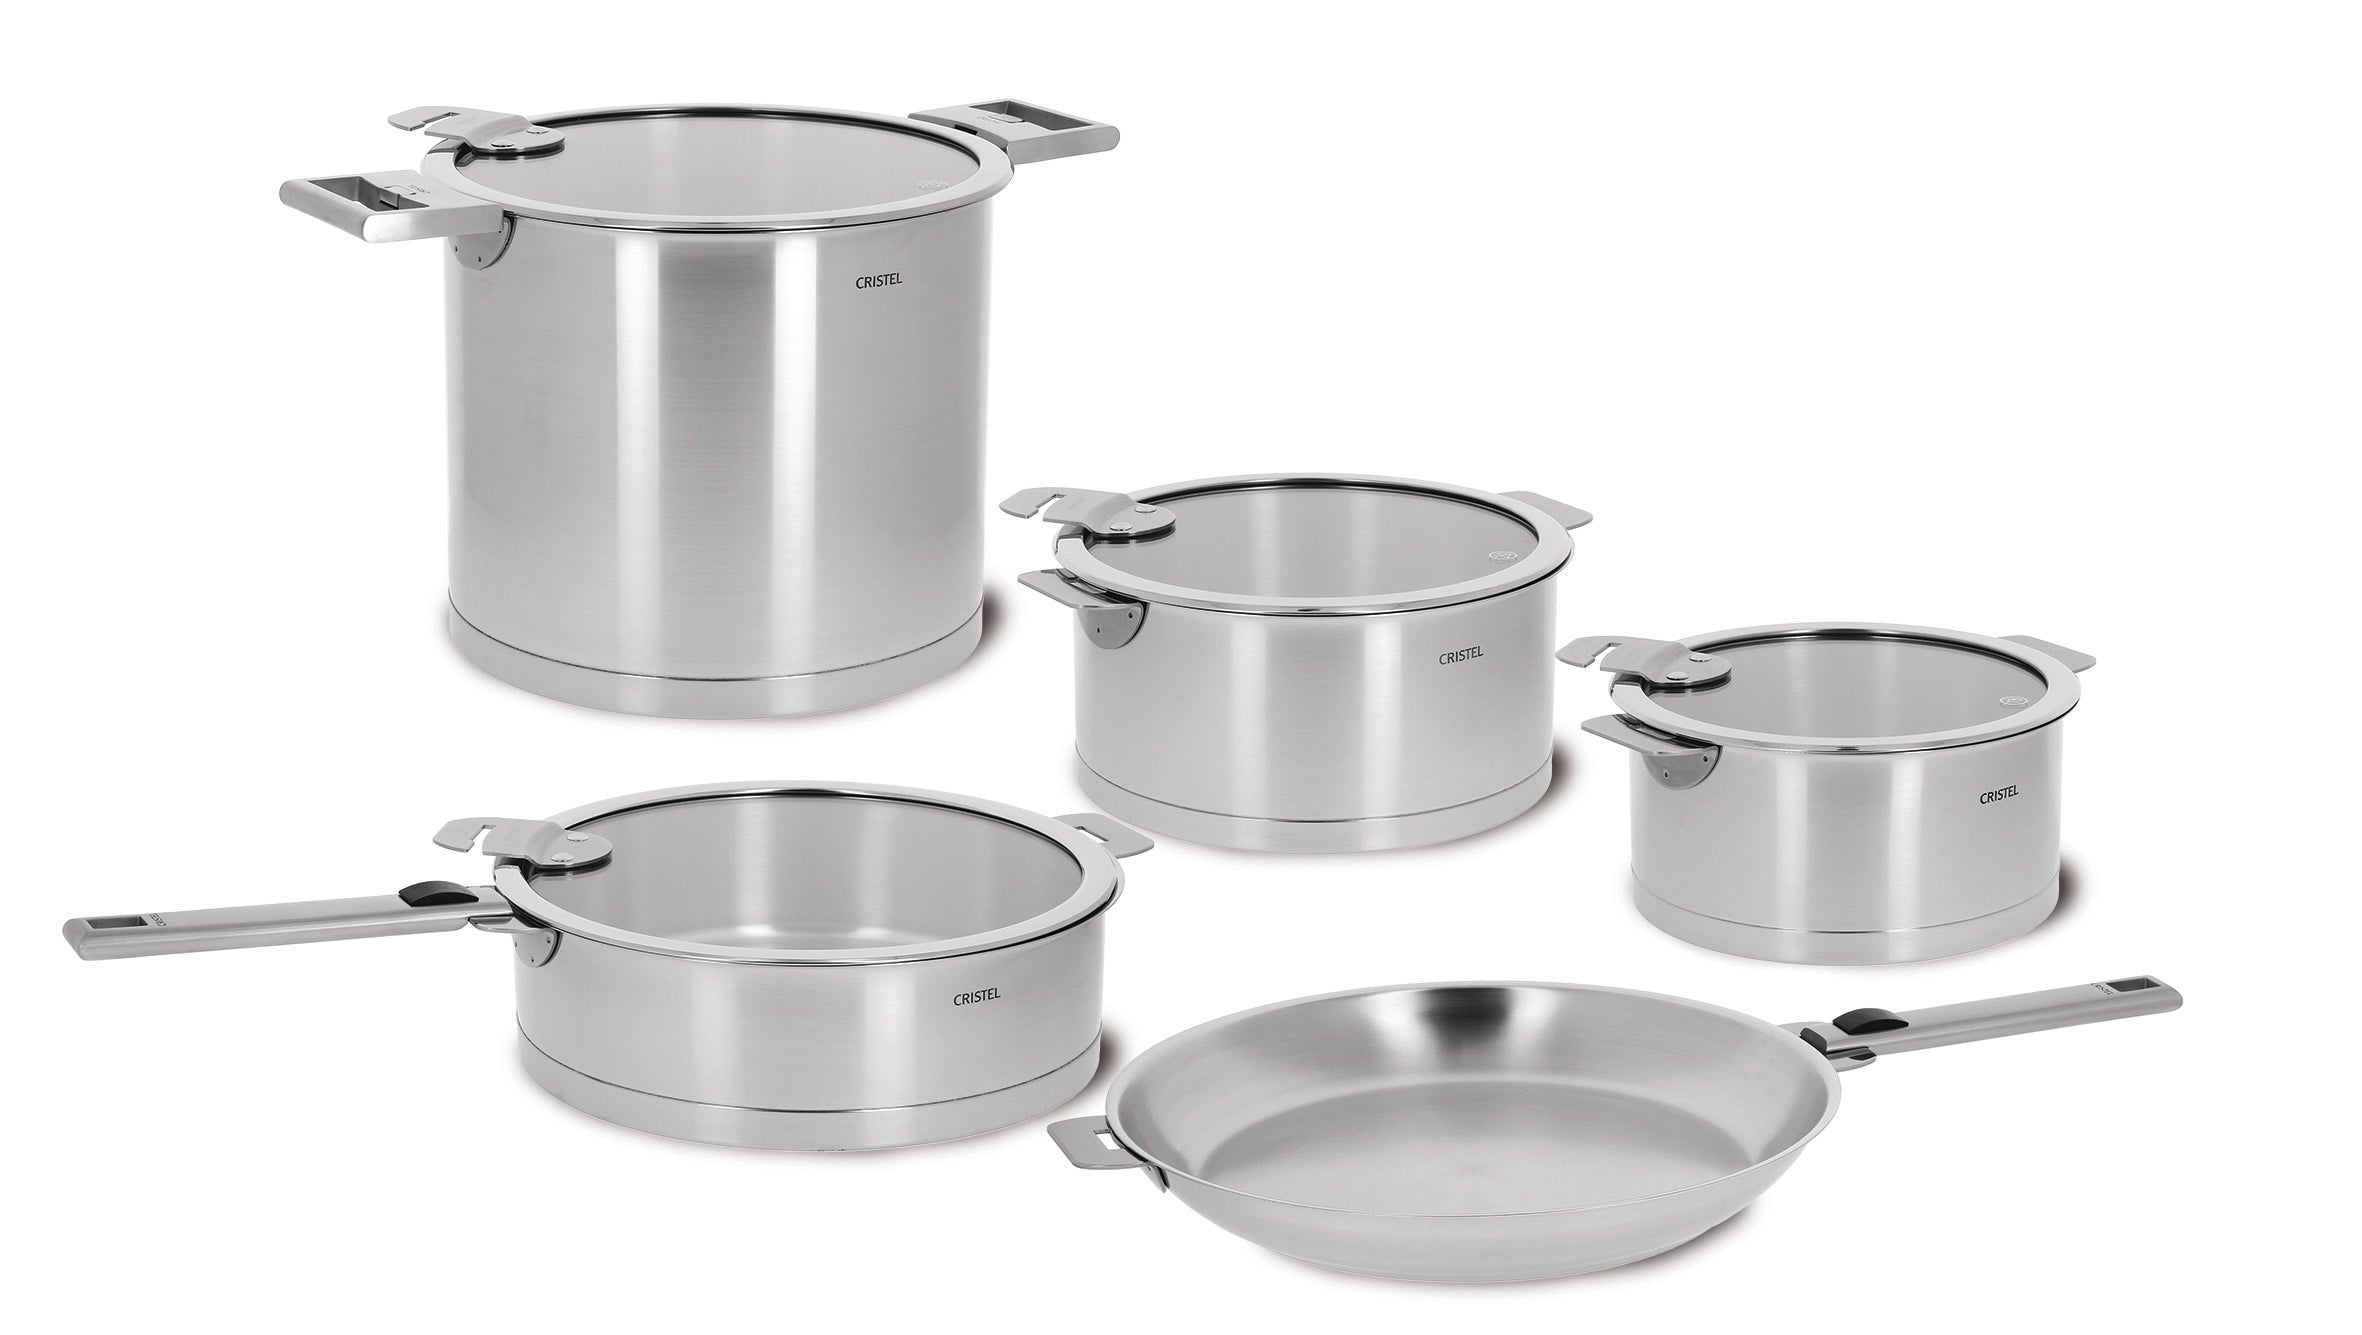 My Review of the Country Kitchen 13 Piece Cookware Set - 75$ ONLY